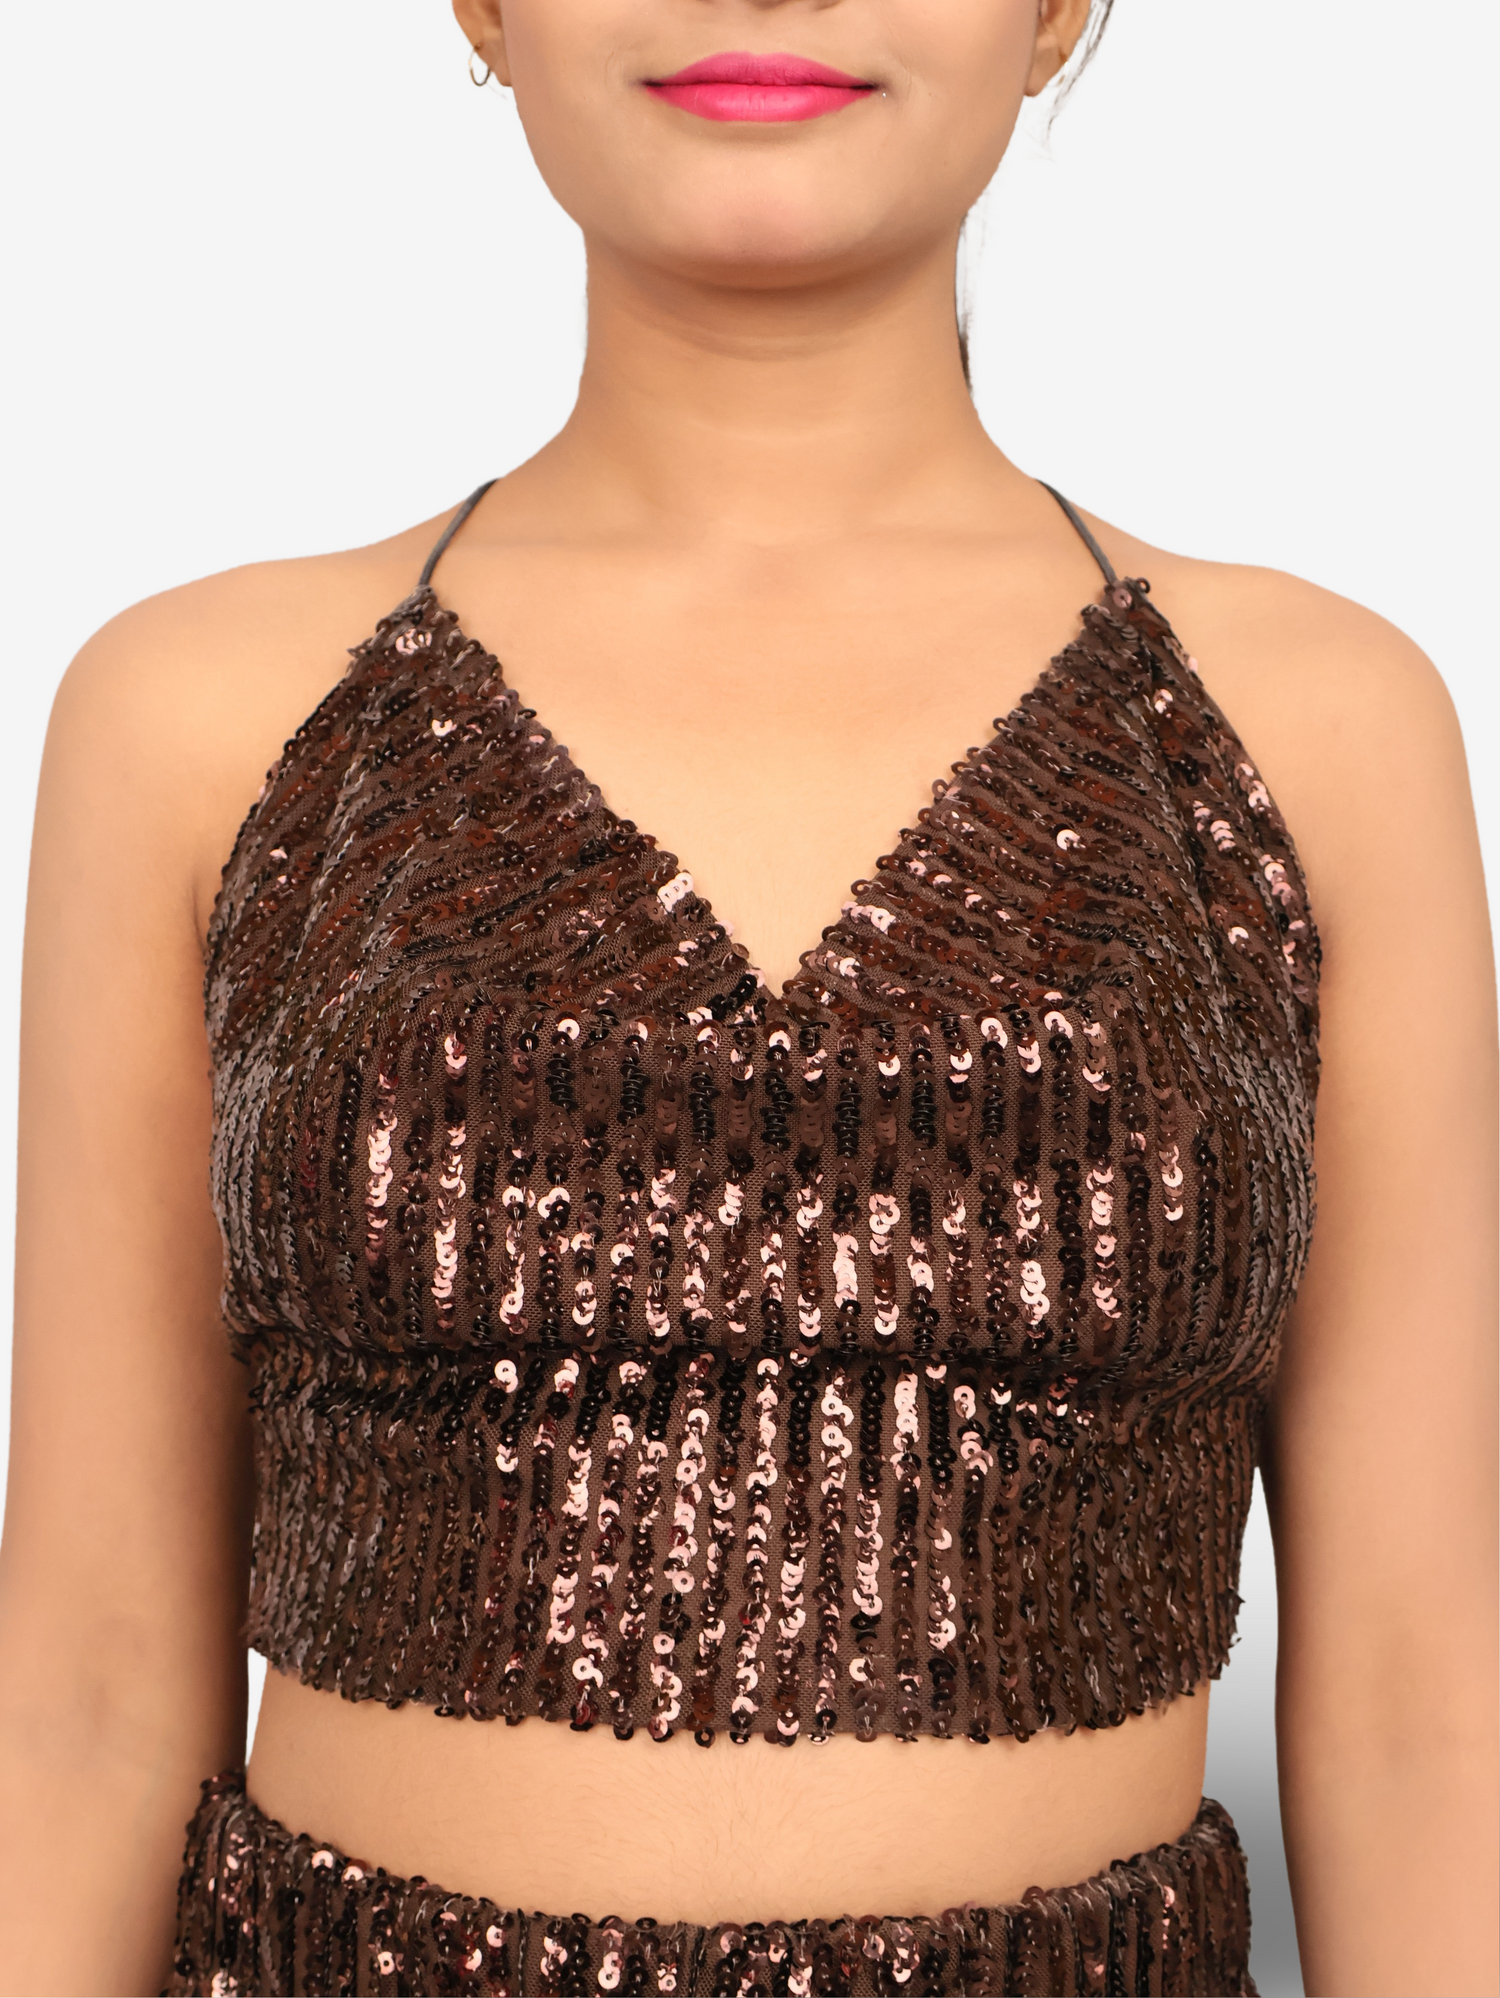 Sequins Spaghetti Neck Co-Ord Set by Shreekama Dark Brown Dress for Party Festival Wedding Occasion in Noida